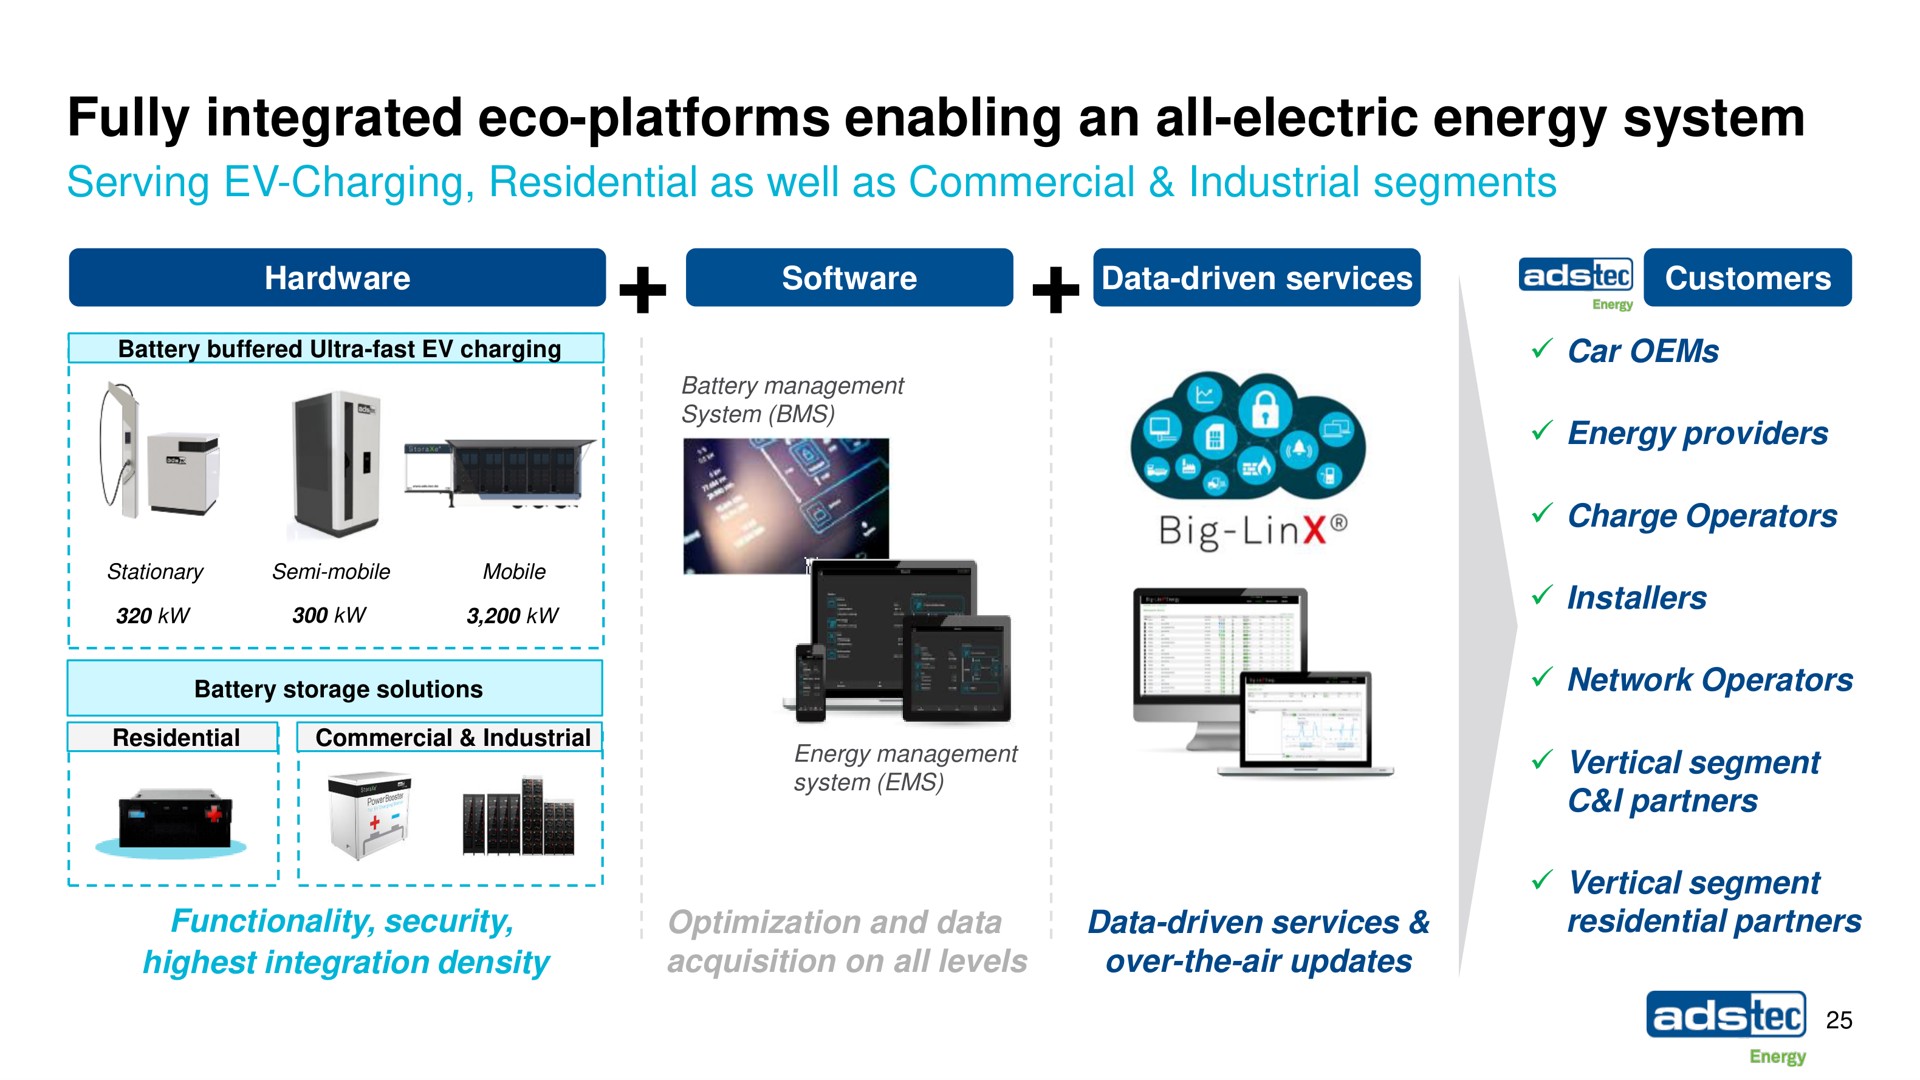 fully integrated platforms enabling an all electric energy system tec | ads-tec Energy